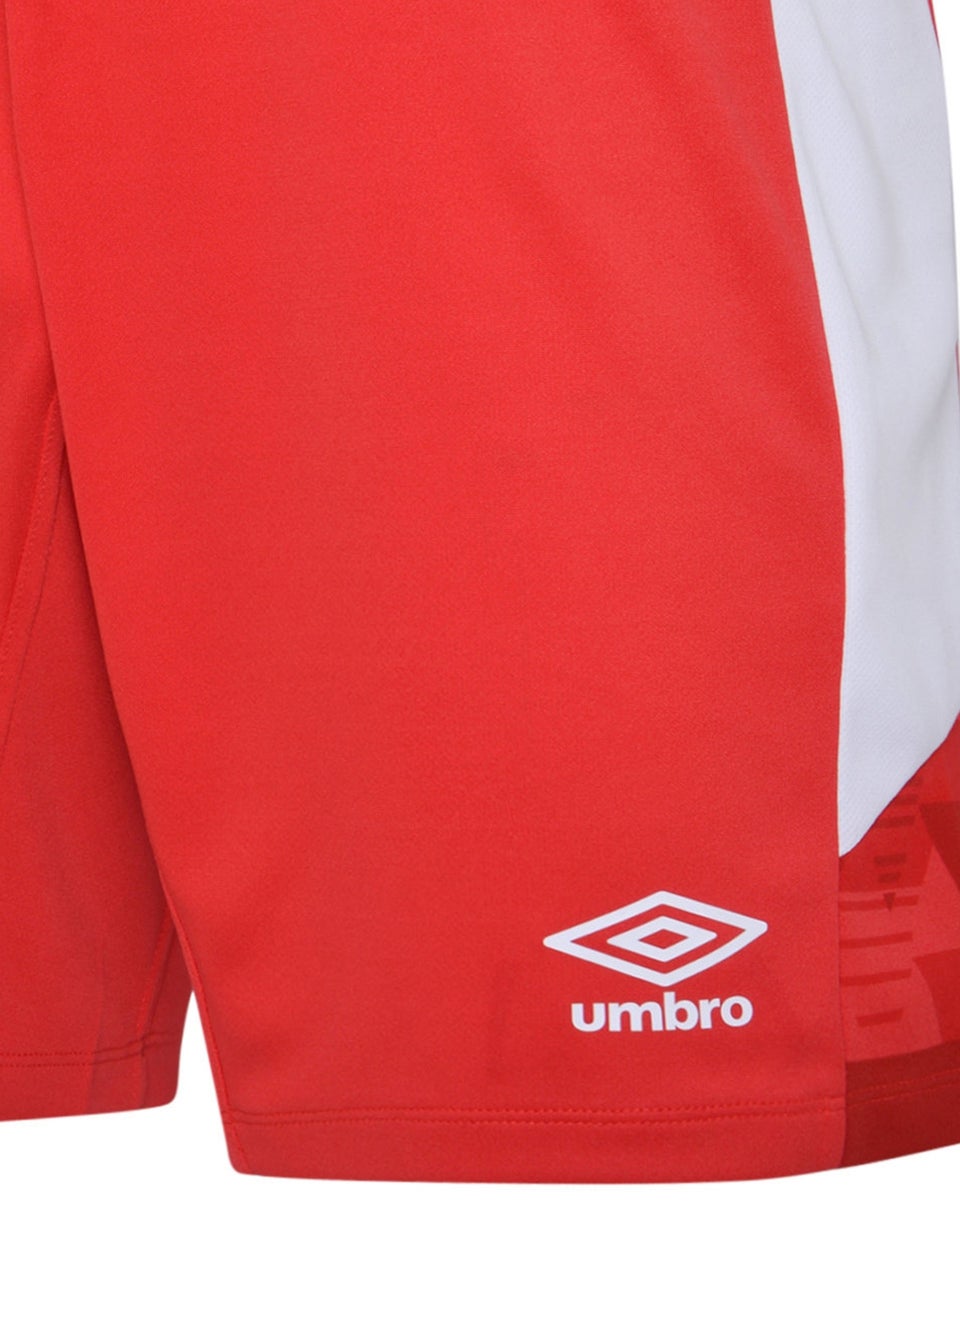 Umbro Red Vier Shorts